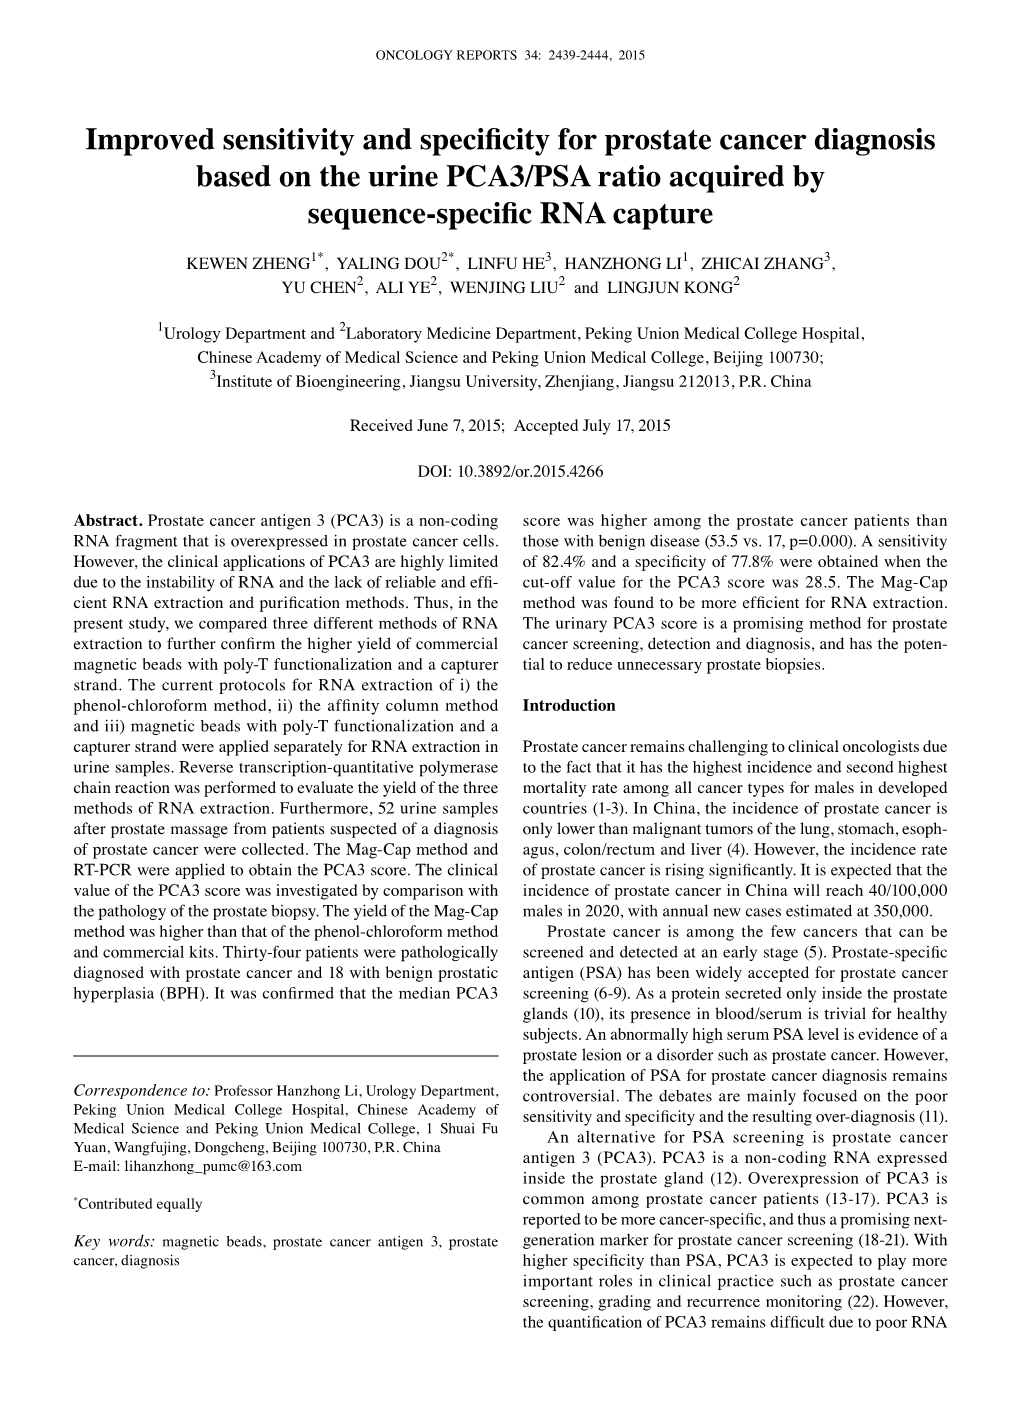 Improved Sensitivity and Specificity for Prostate Cancer Diagnosis Based on the Urine PCA3/PSA Ratio Acquired by Sequence‑Specific RNA Capture